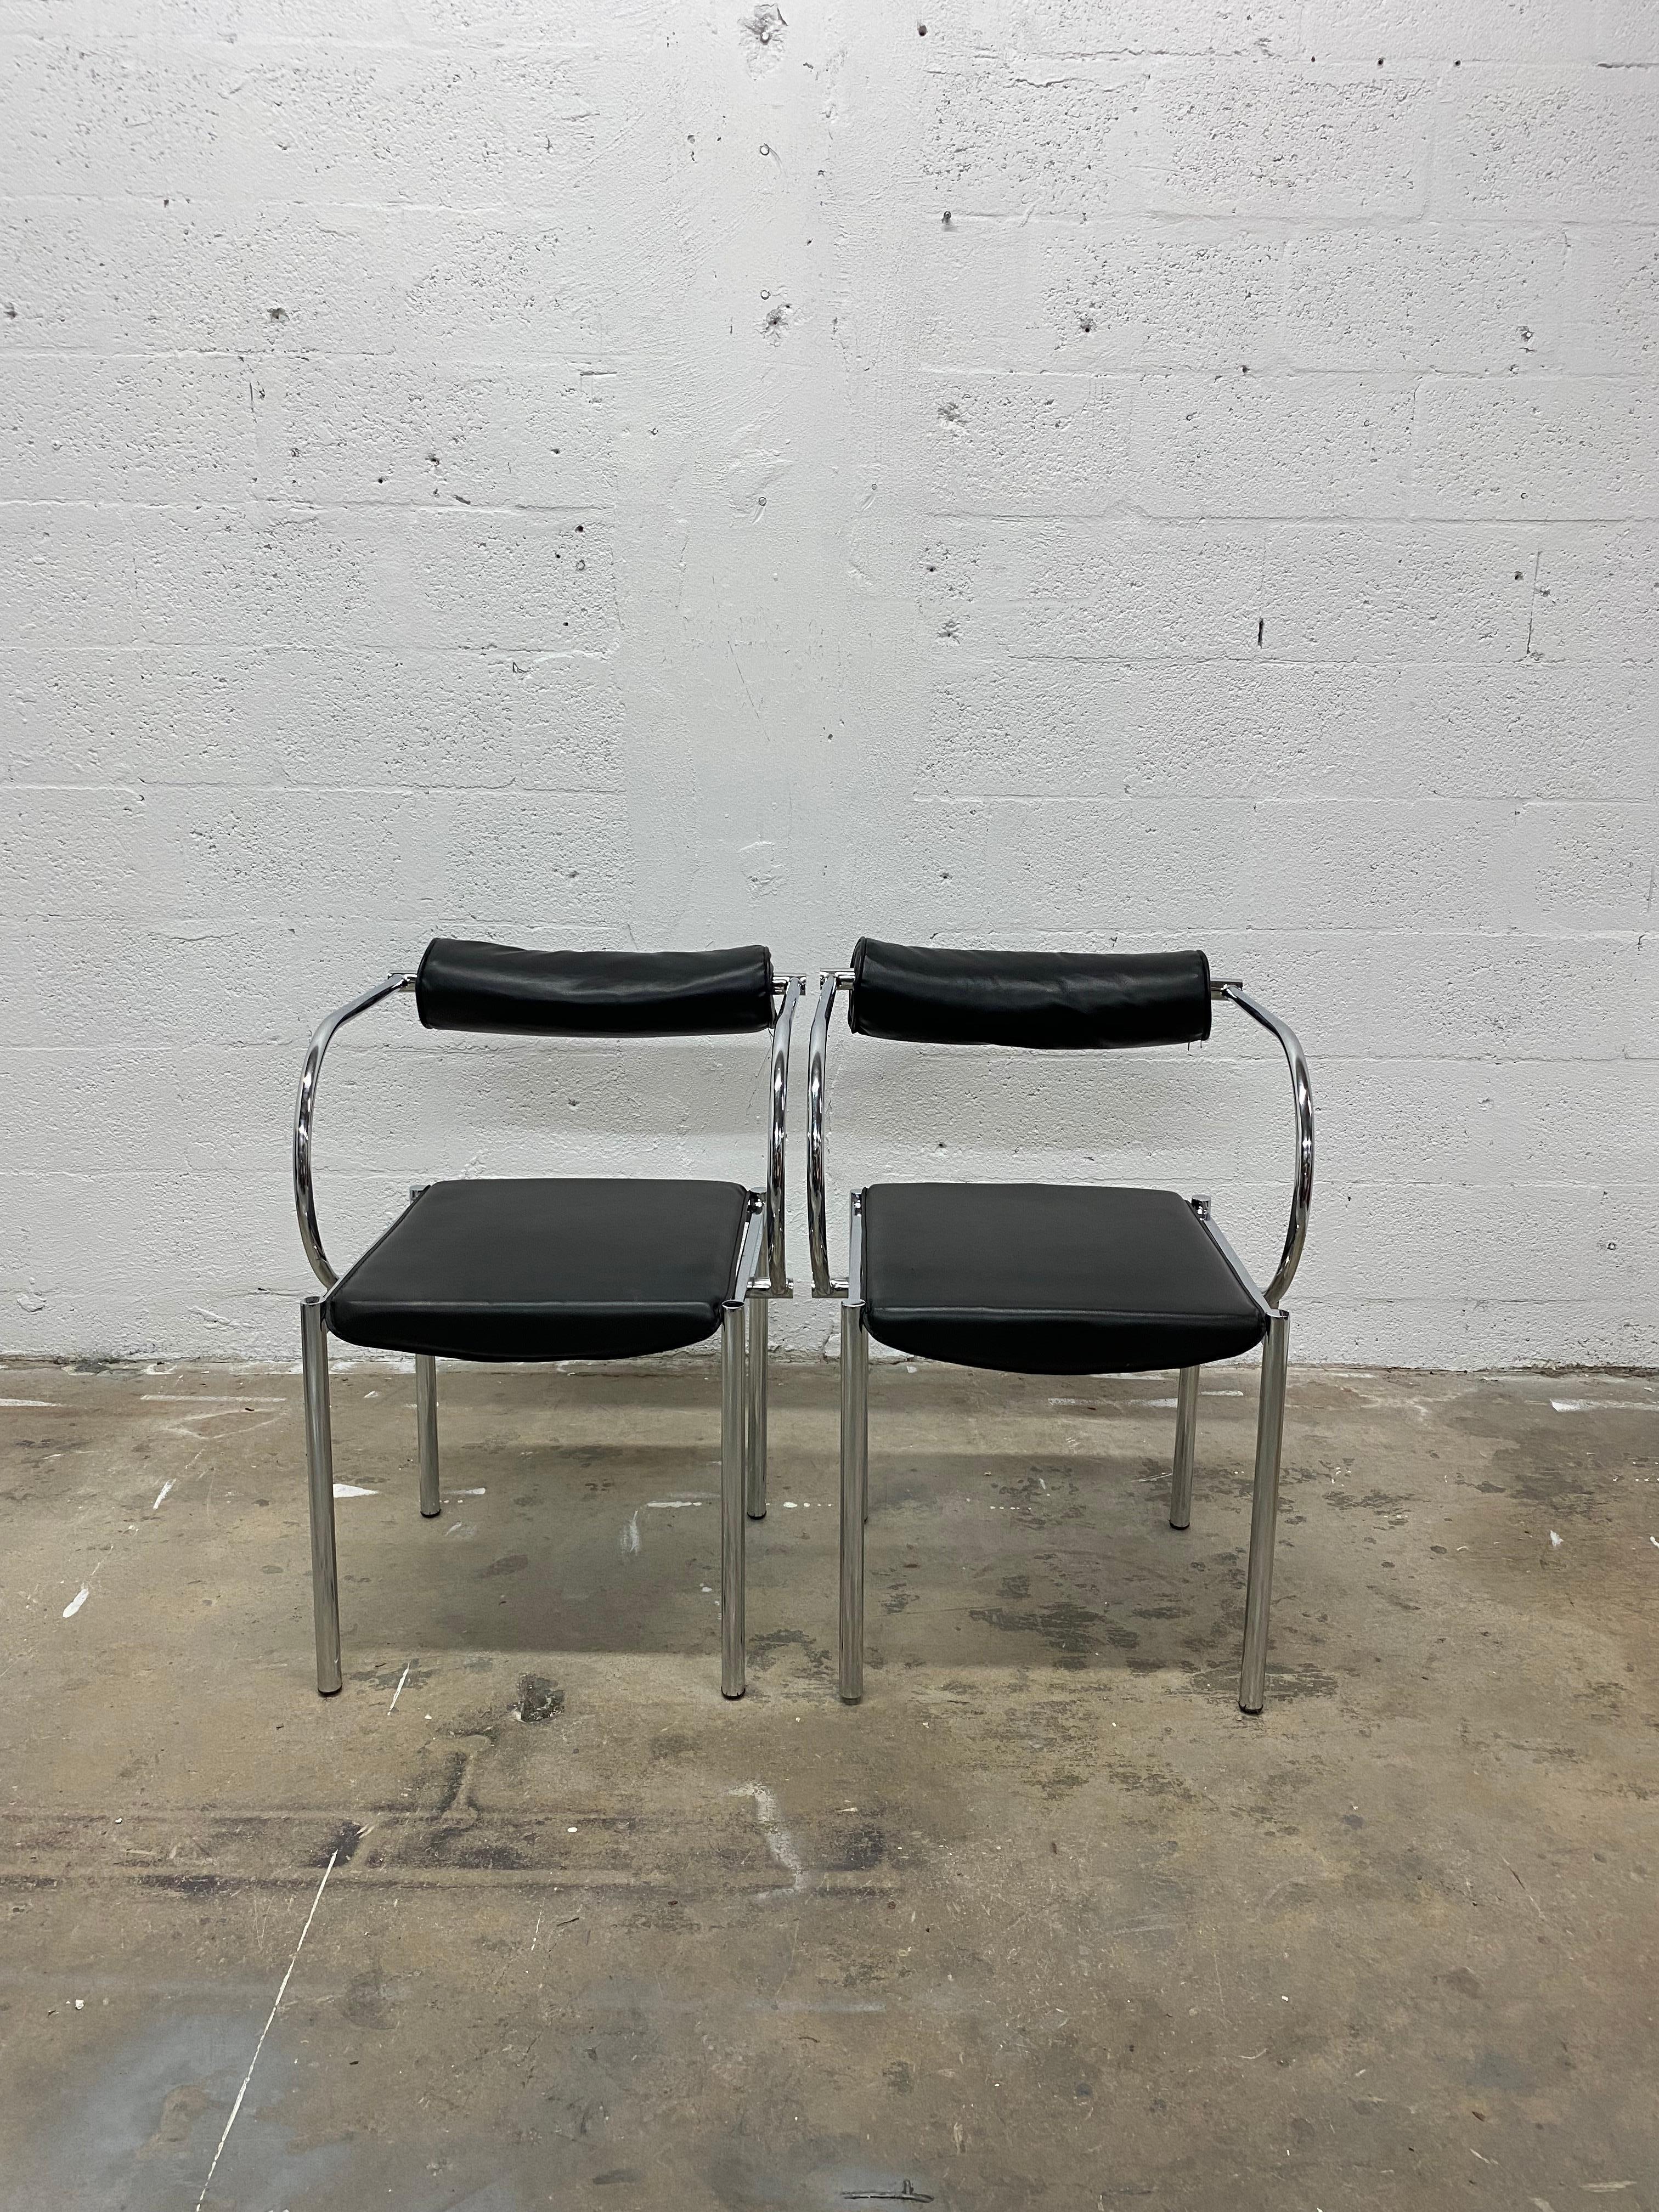 Pair of Postmodern design chairs with black naugahyde seat and foam back on a polished chrome tubular frame. Manufacturer unknown.